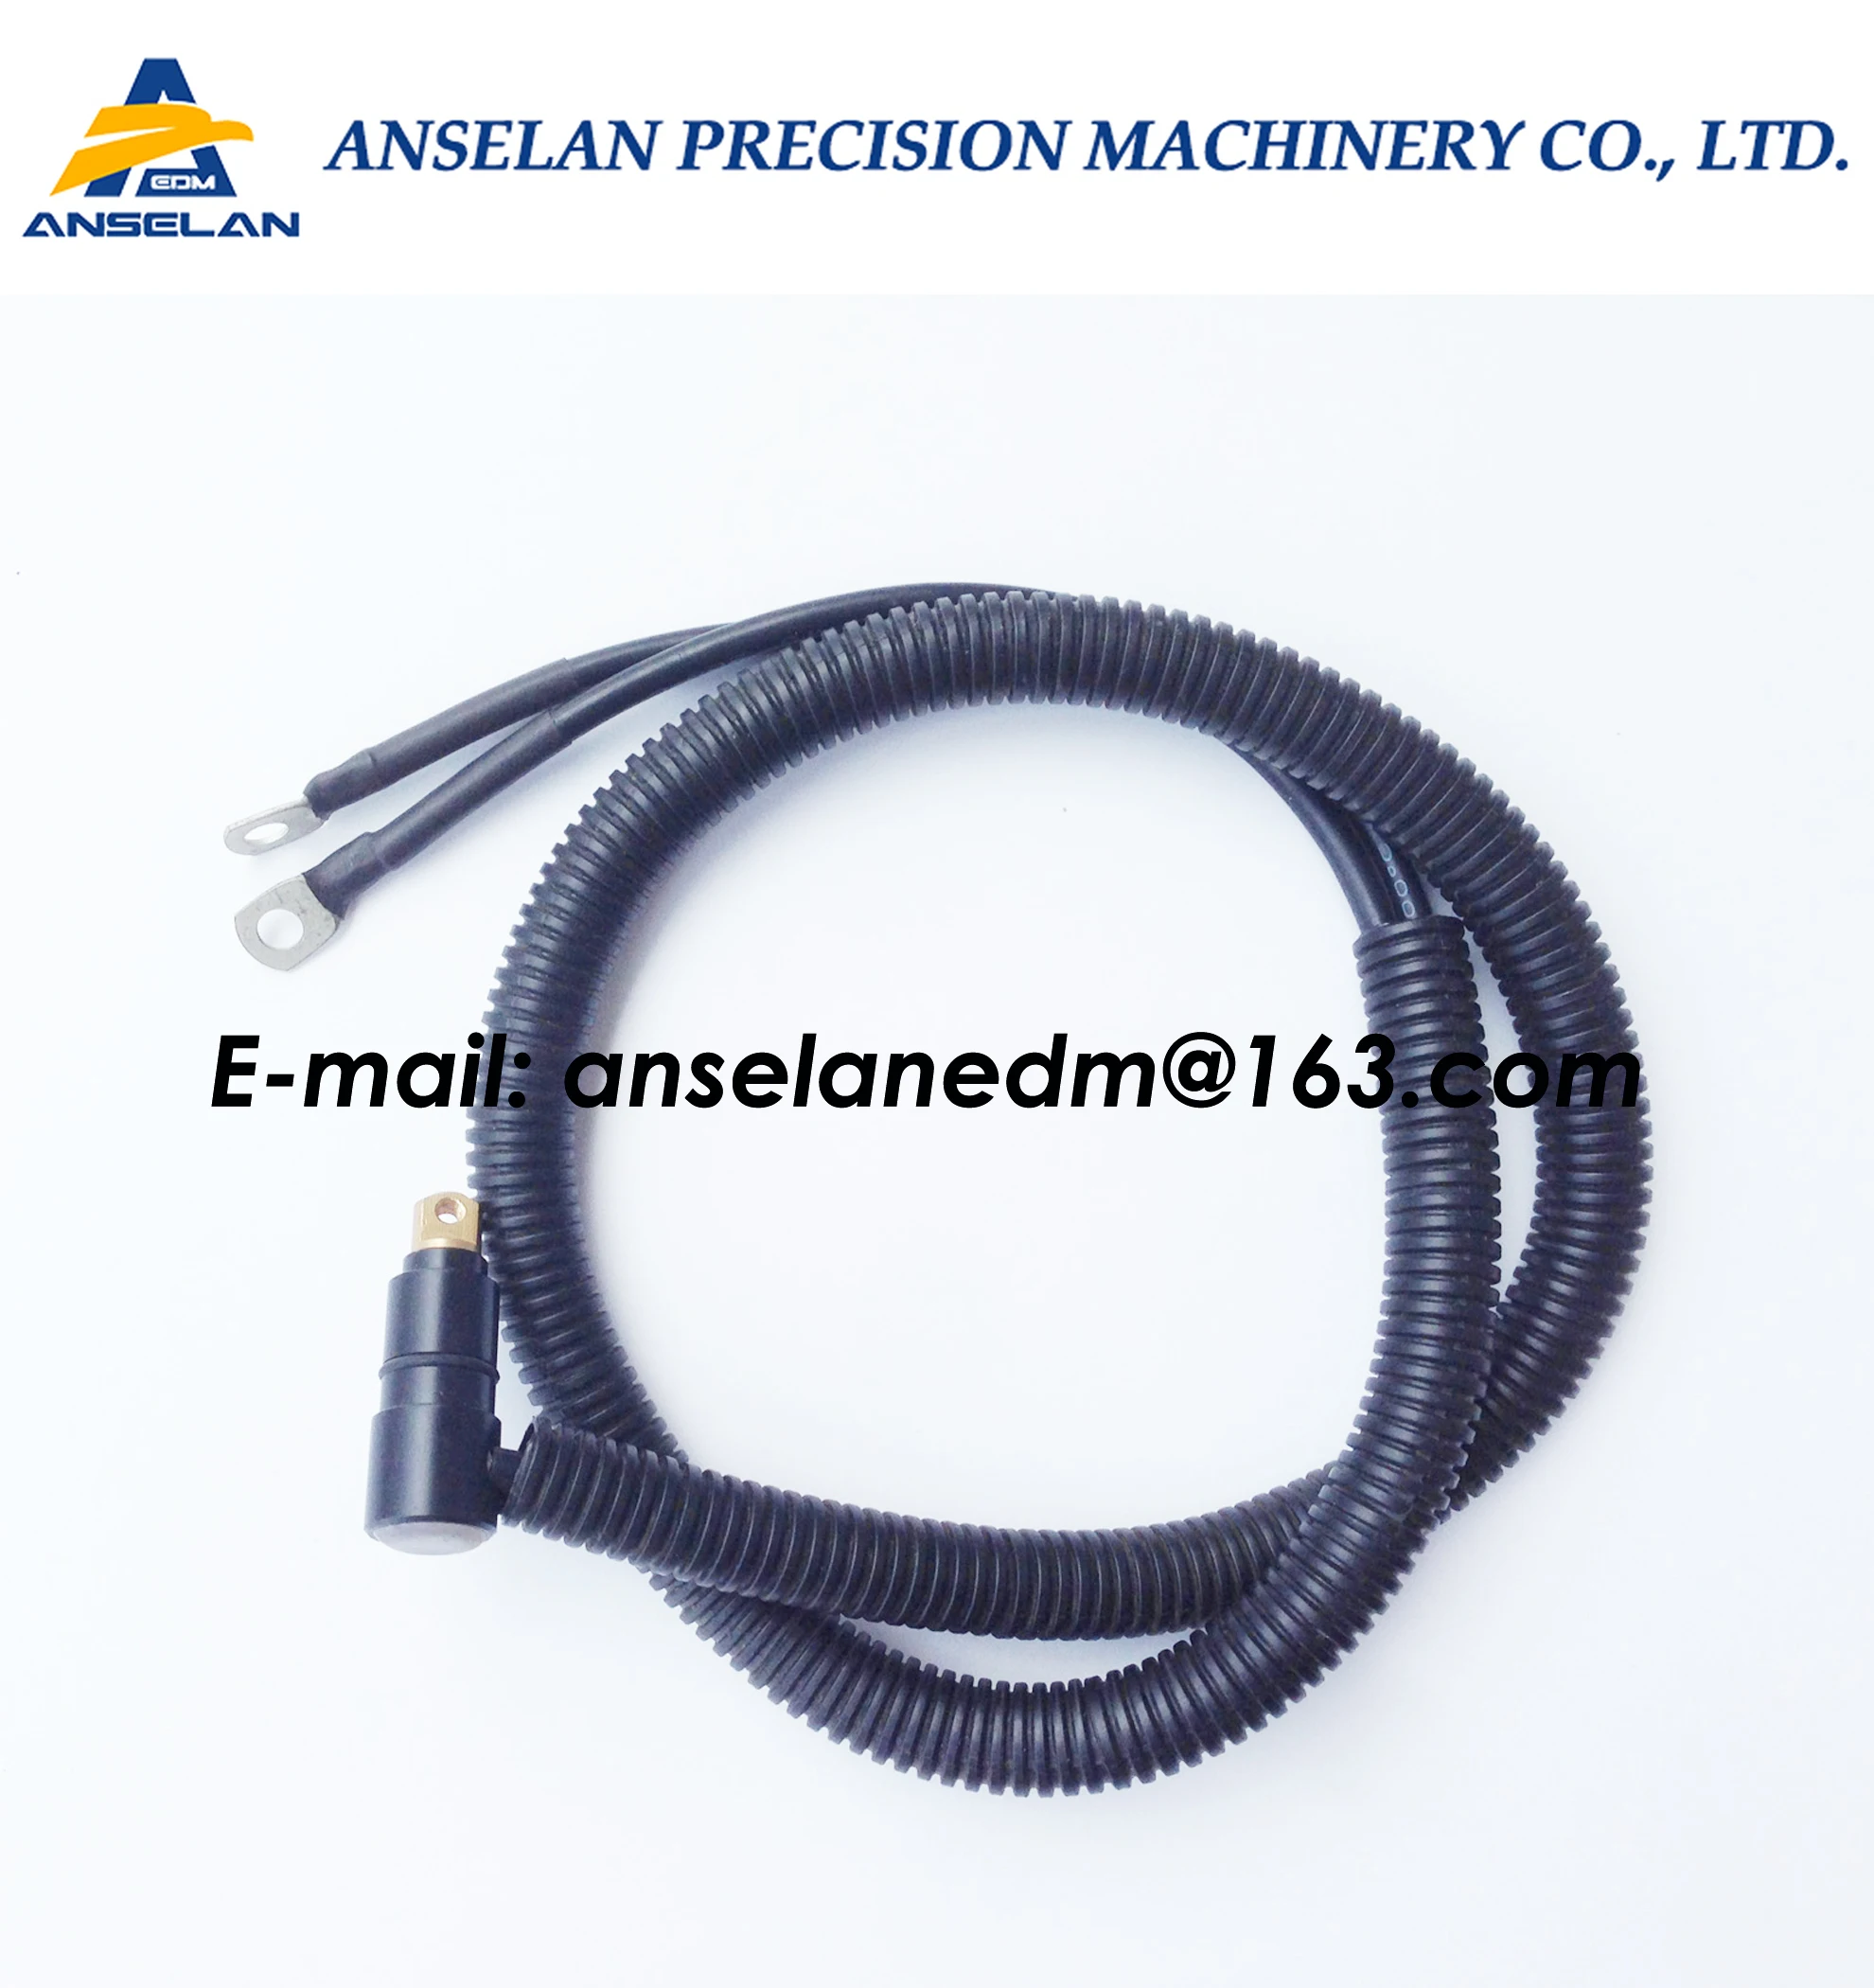 edm Lower Power Supply Cable L=950mm 135000217, EDM Twincable lower head 135.000.217 edm Power Cable L=950mm 24.54.134 for ROBOF